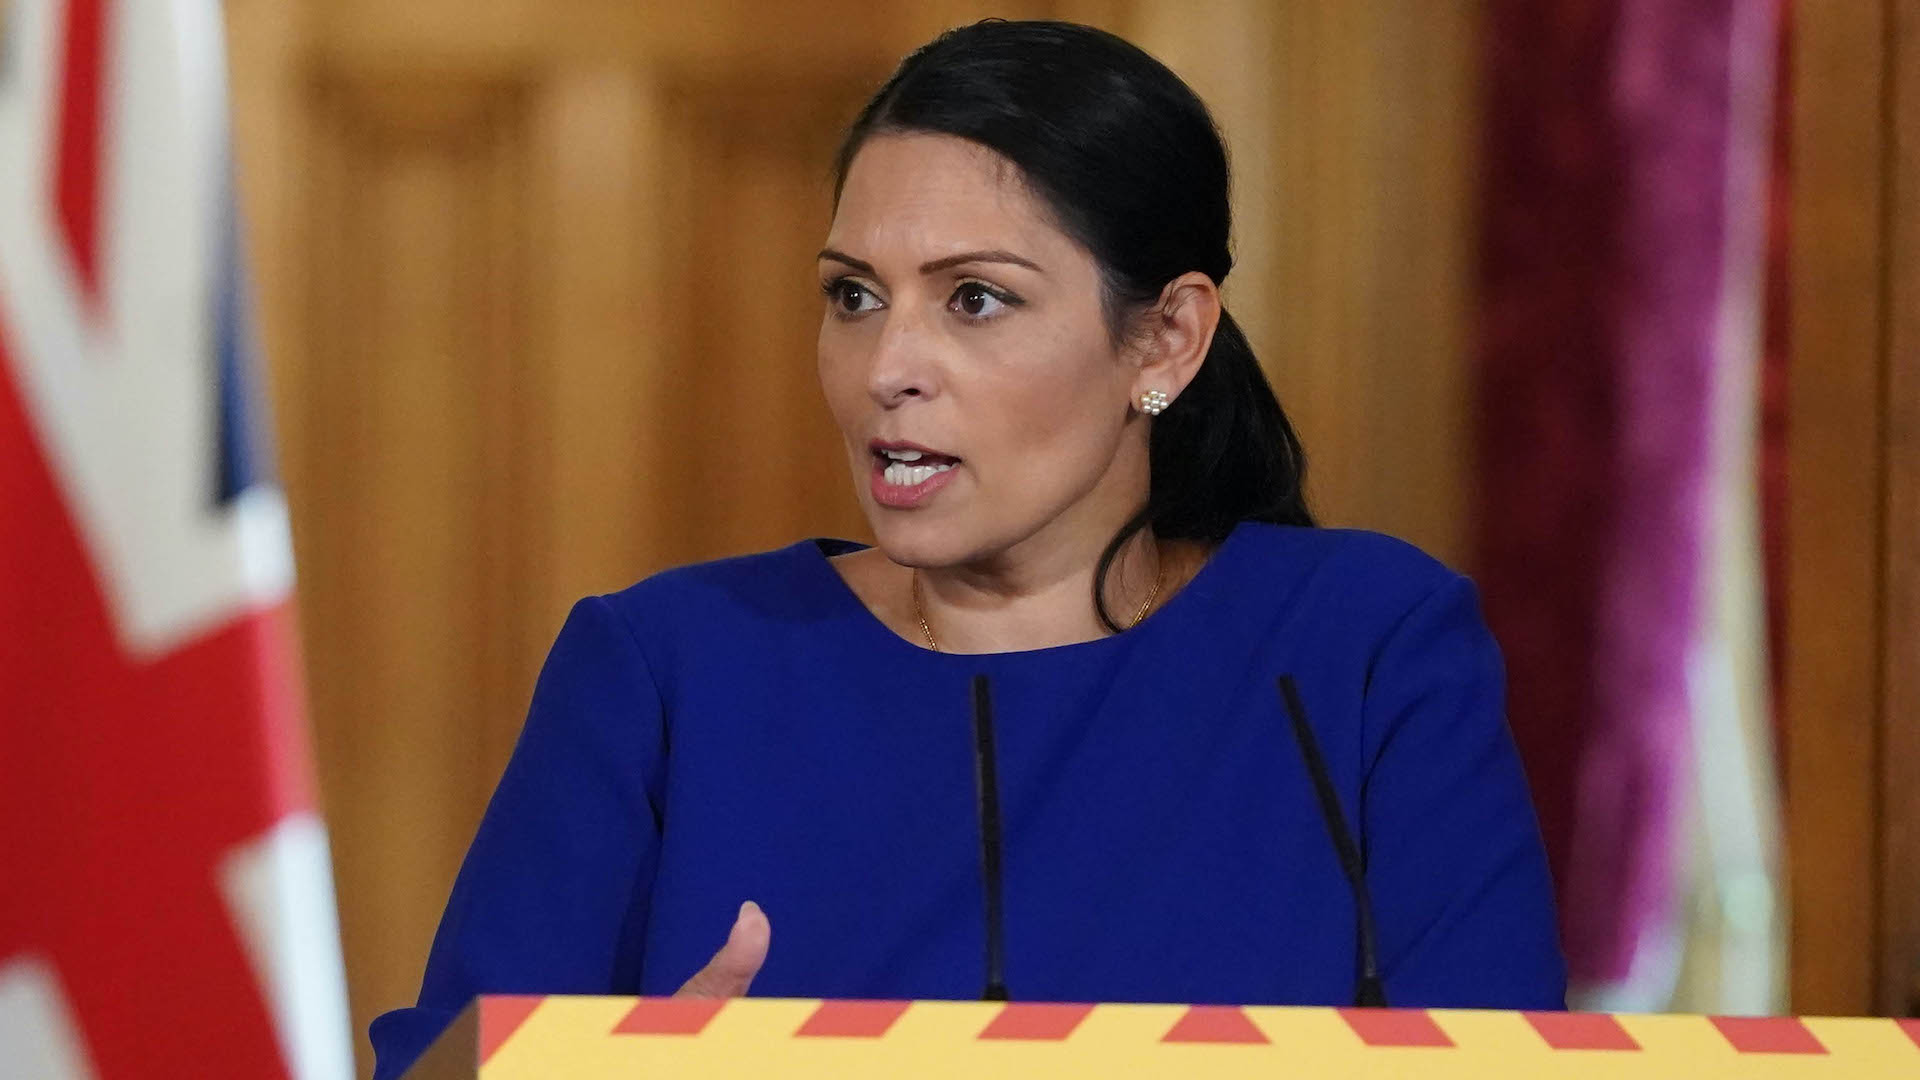 Priti Patel ruled out repealing the no recourse to public funds condition during the pandemic.